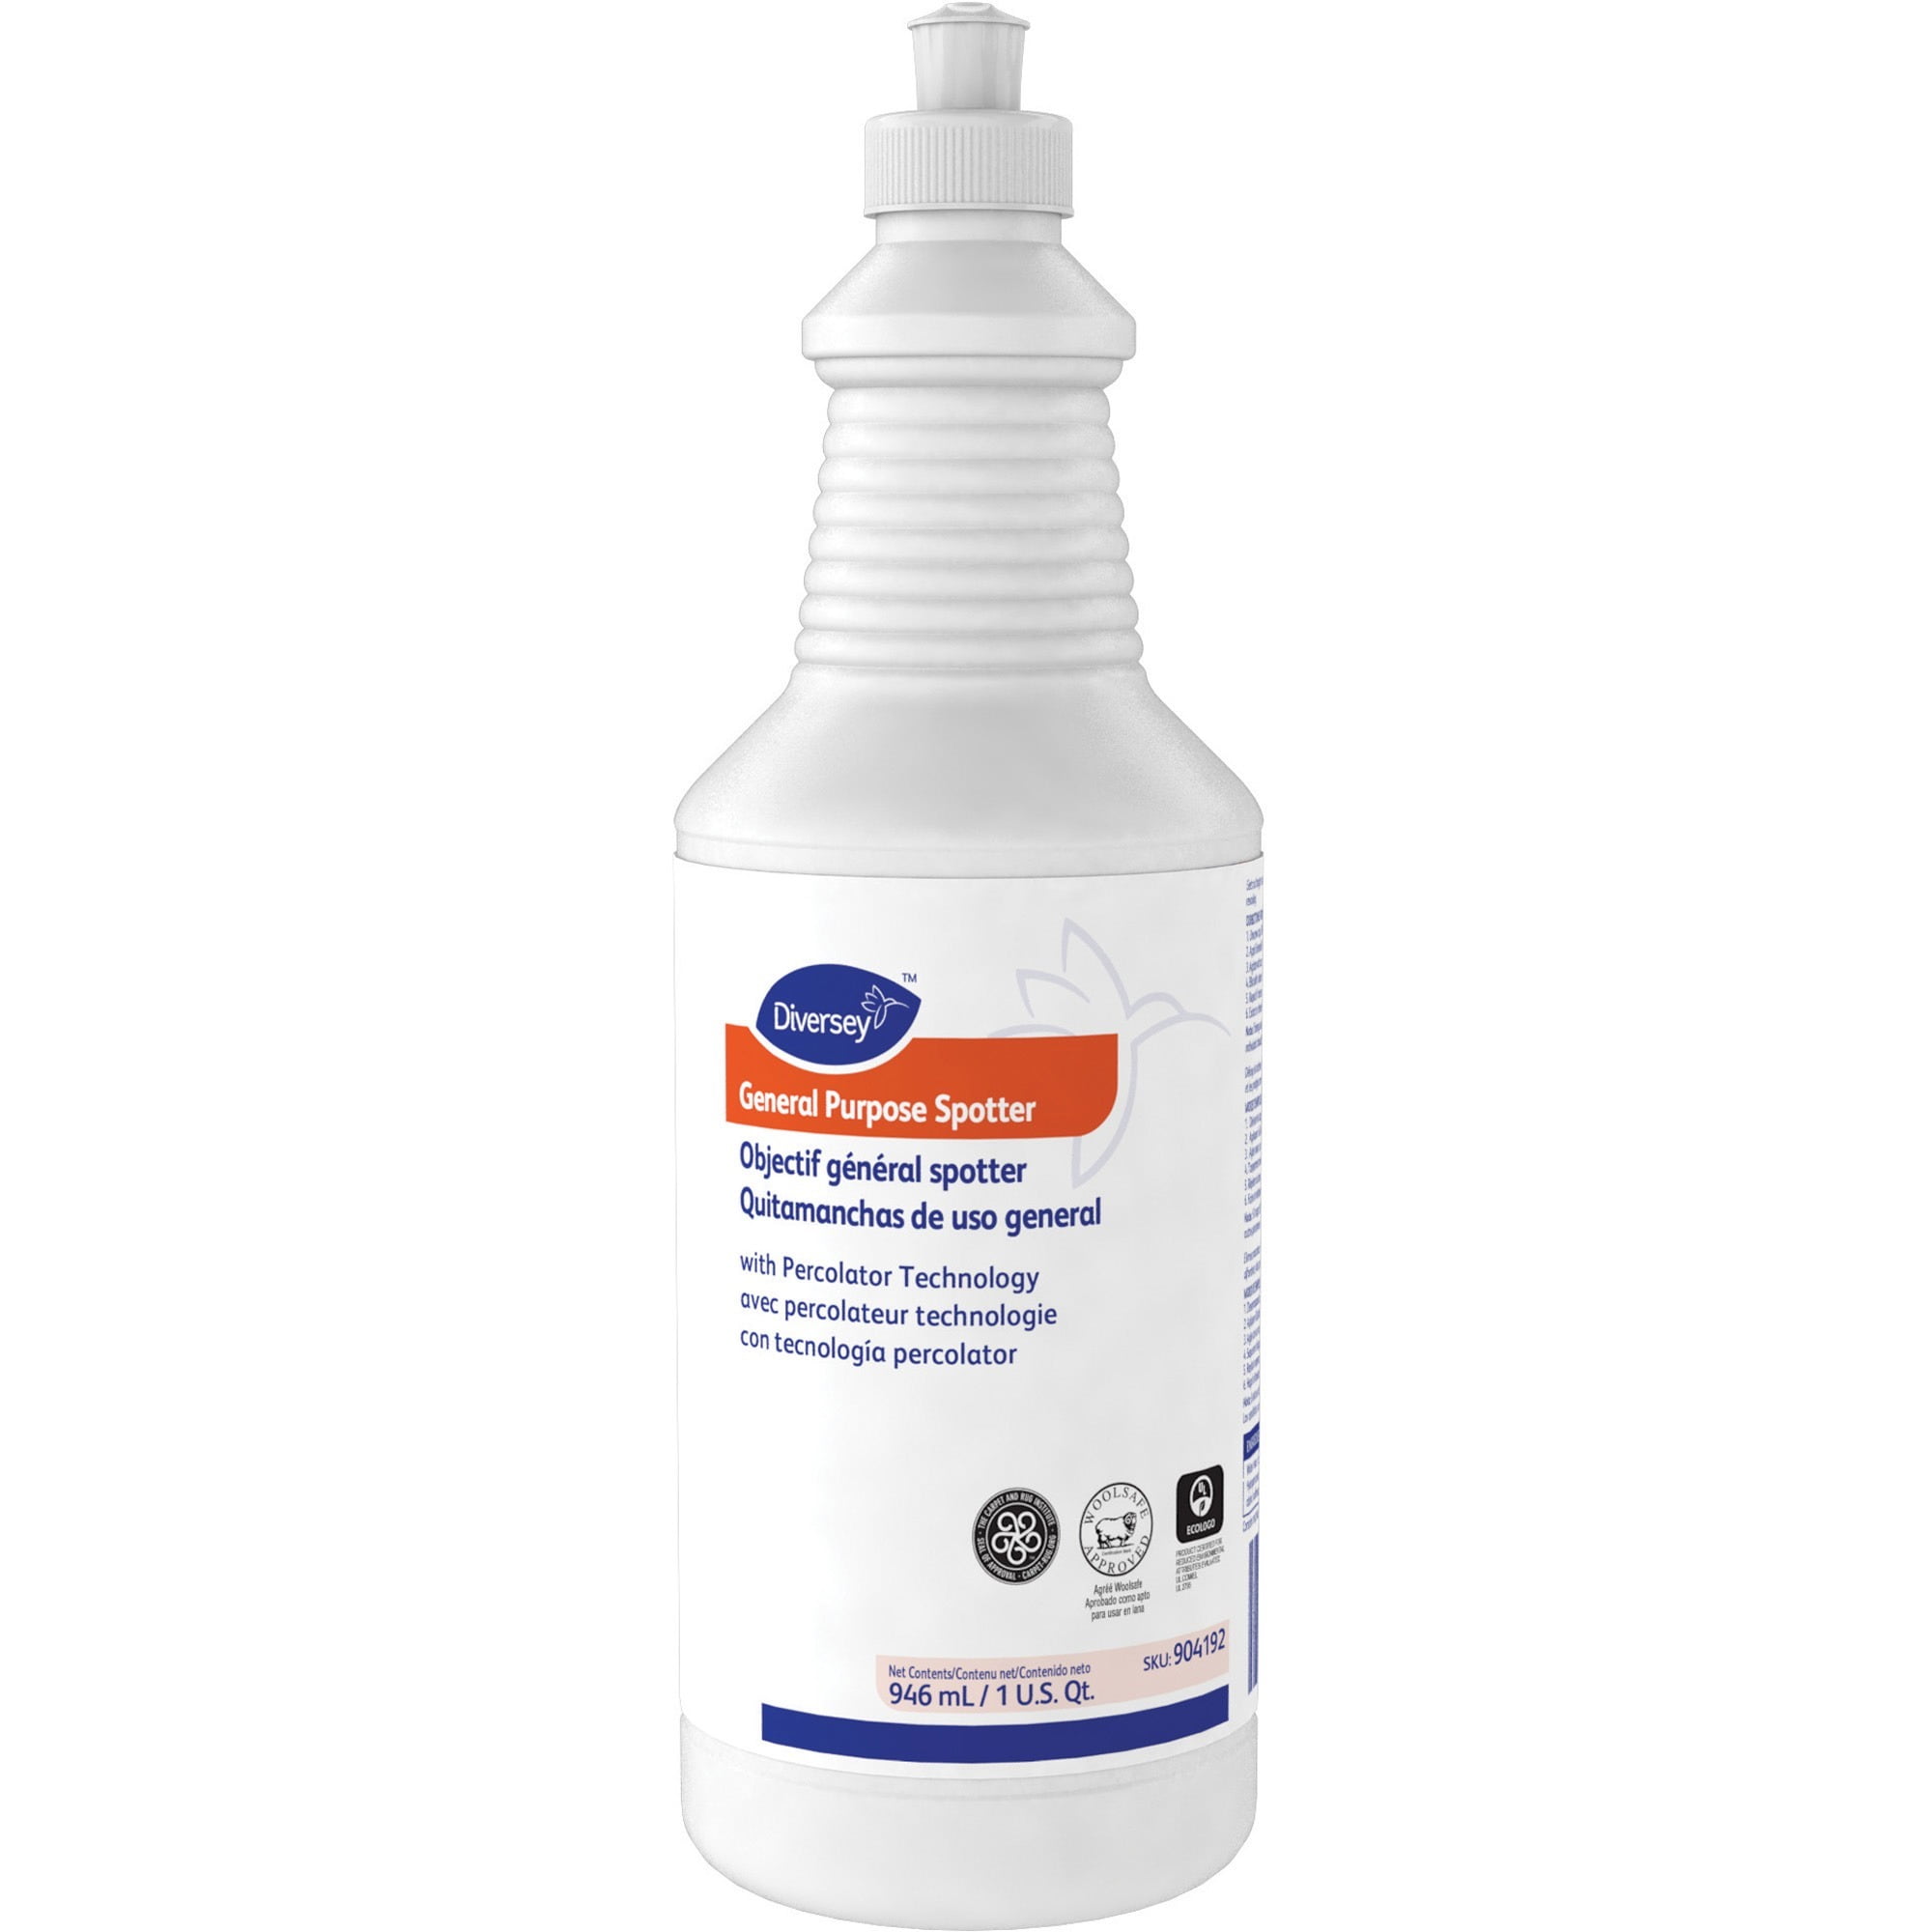 Amodex Ink and Stain Remover 4oz Bottle, For All Surfaces 